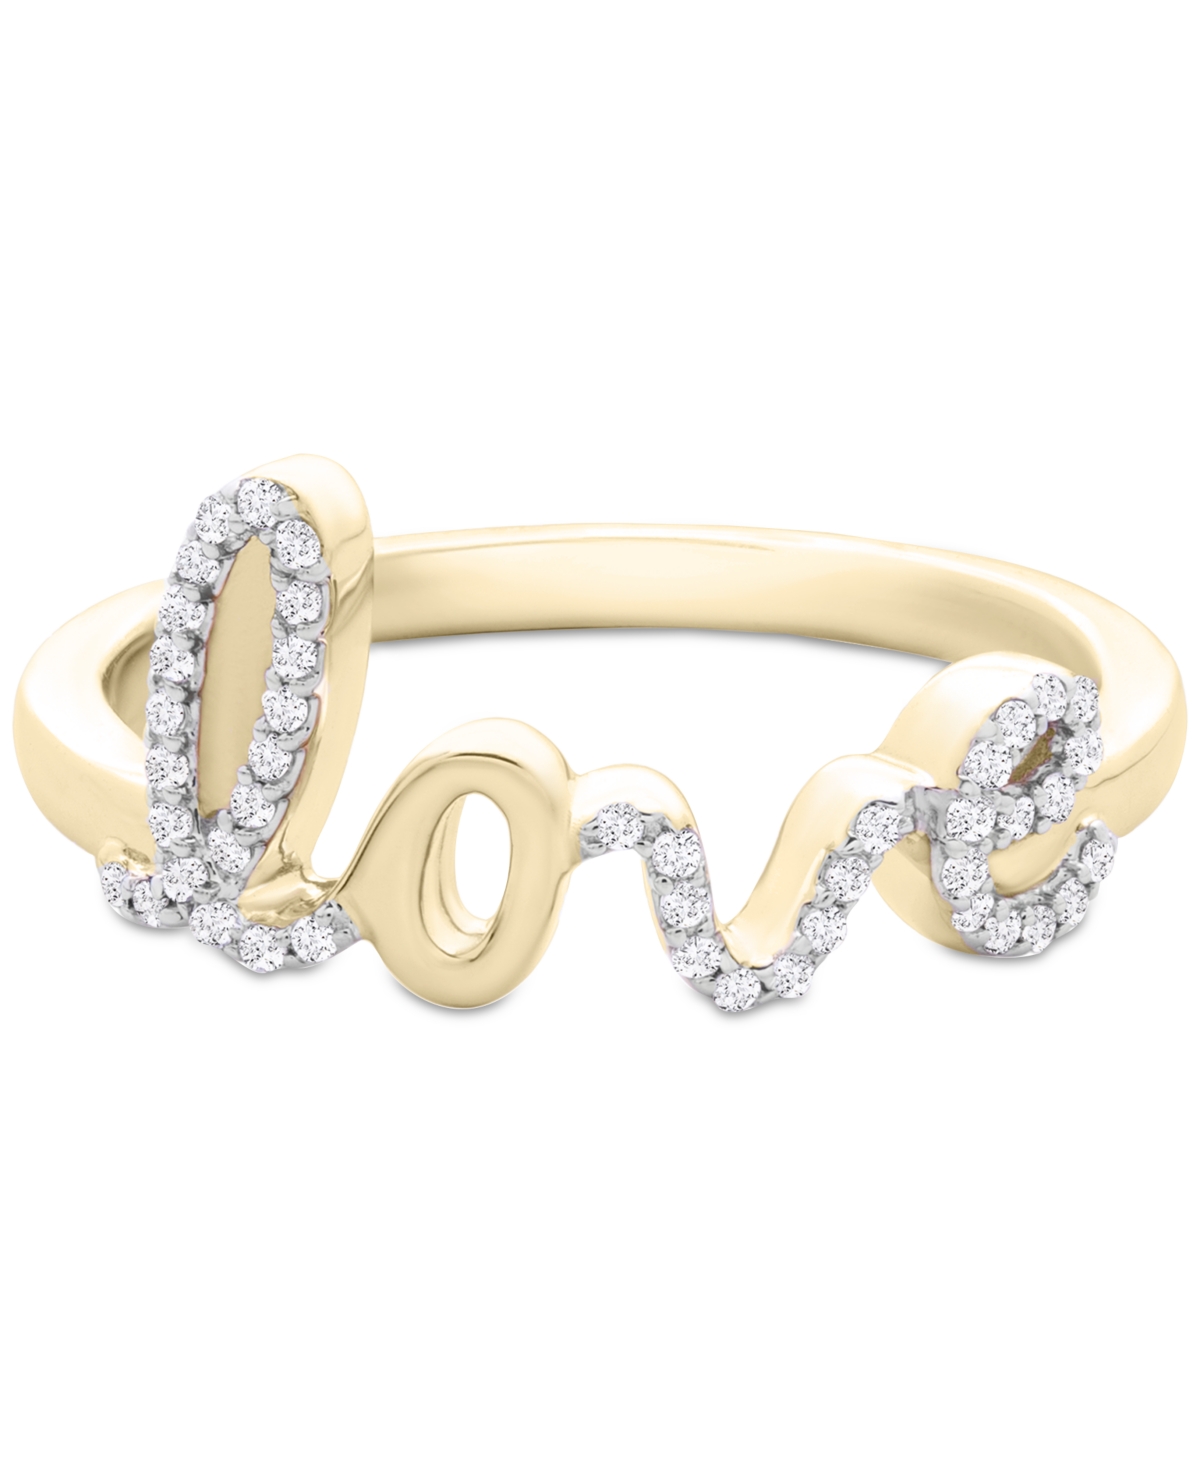 Diamond Love Ring (1/6 ct. t.w.) in 14k Gold or 14k White Gold, Created for Macy's - White Gold